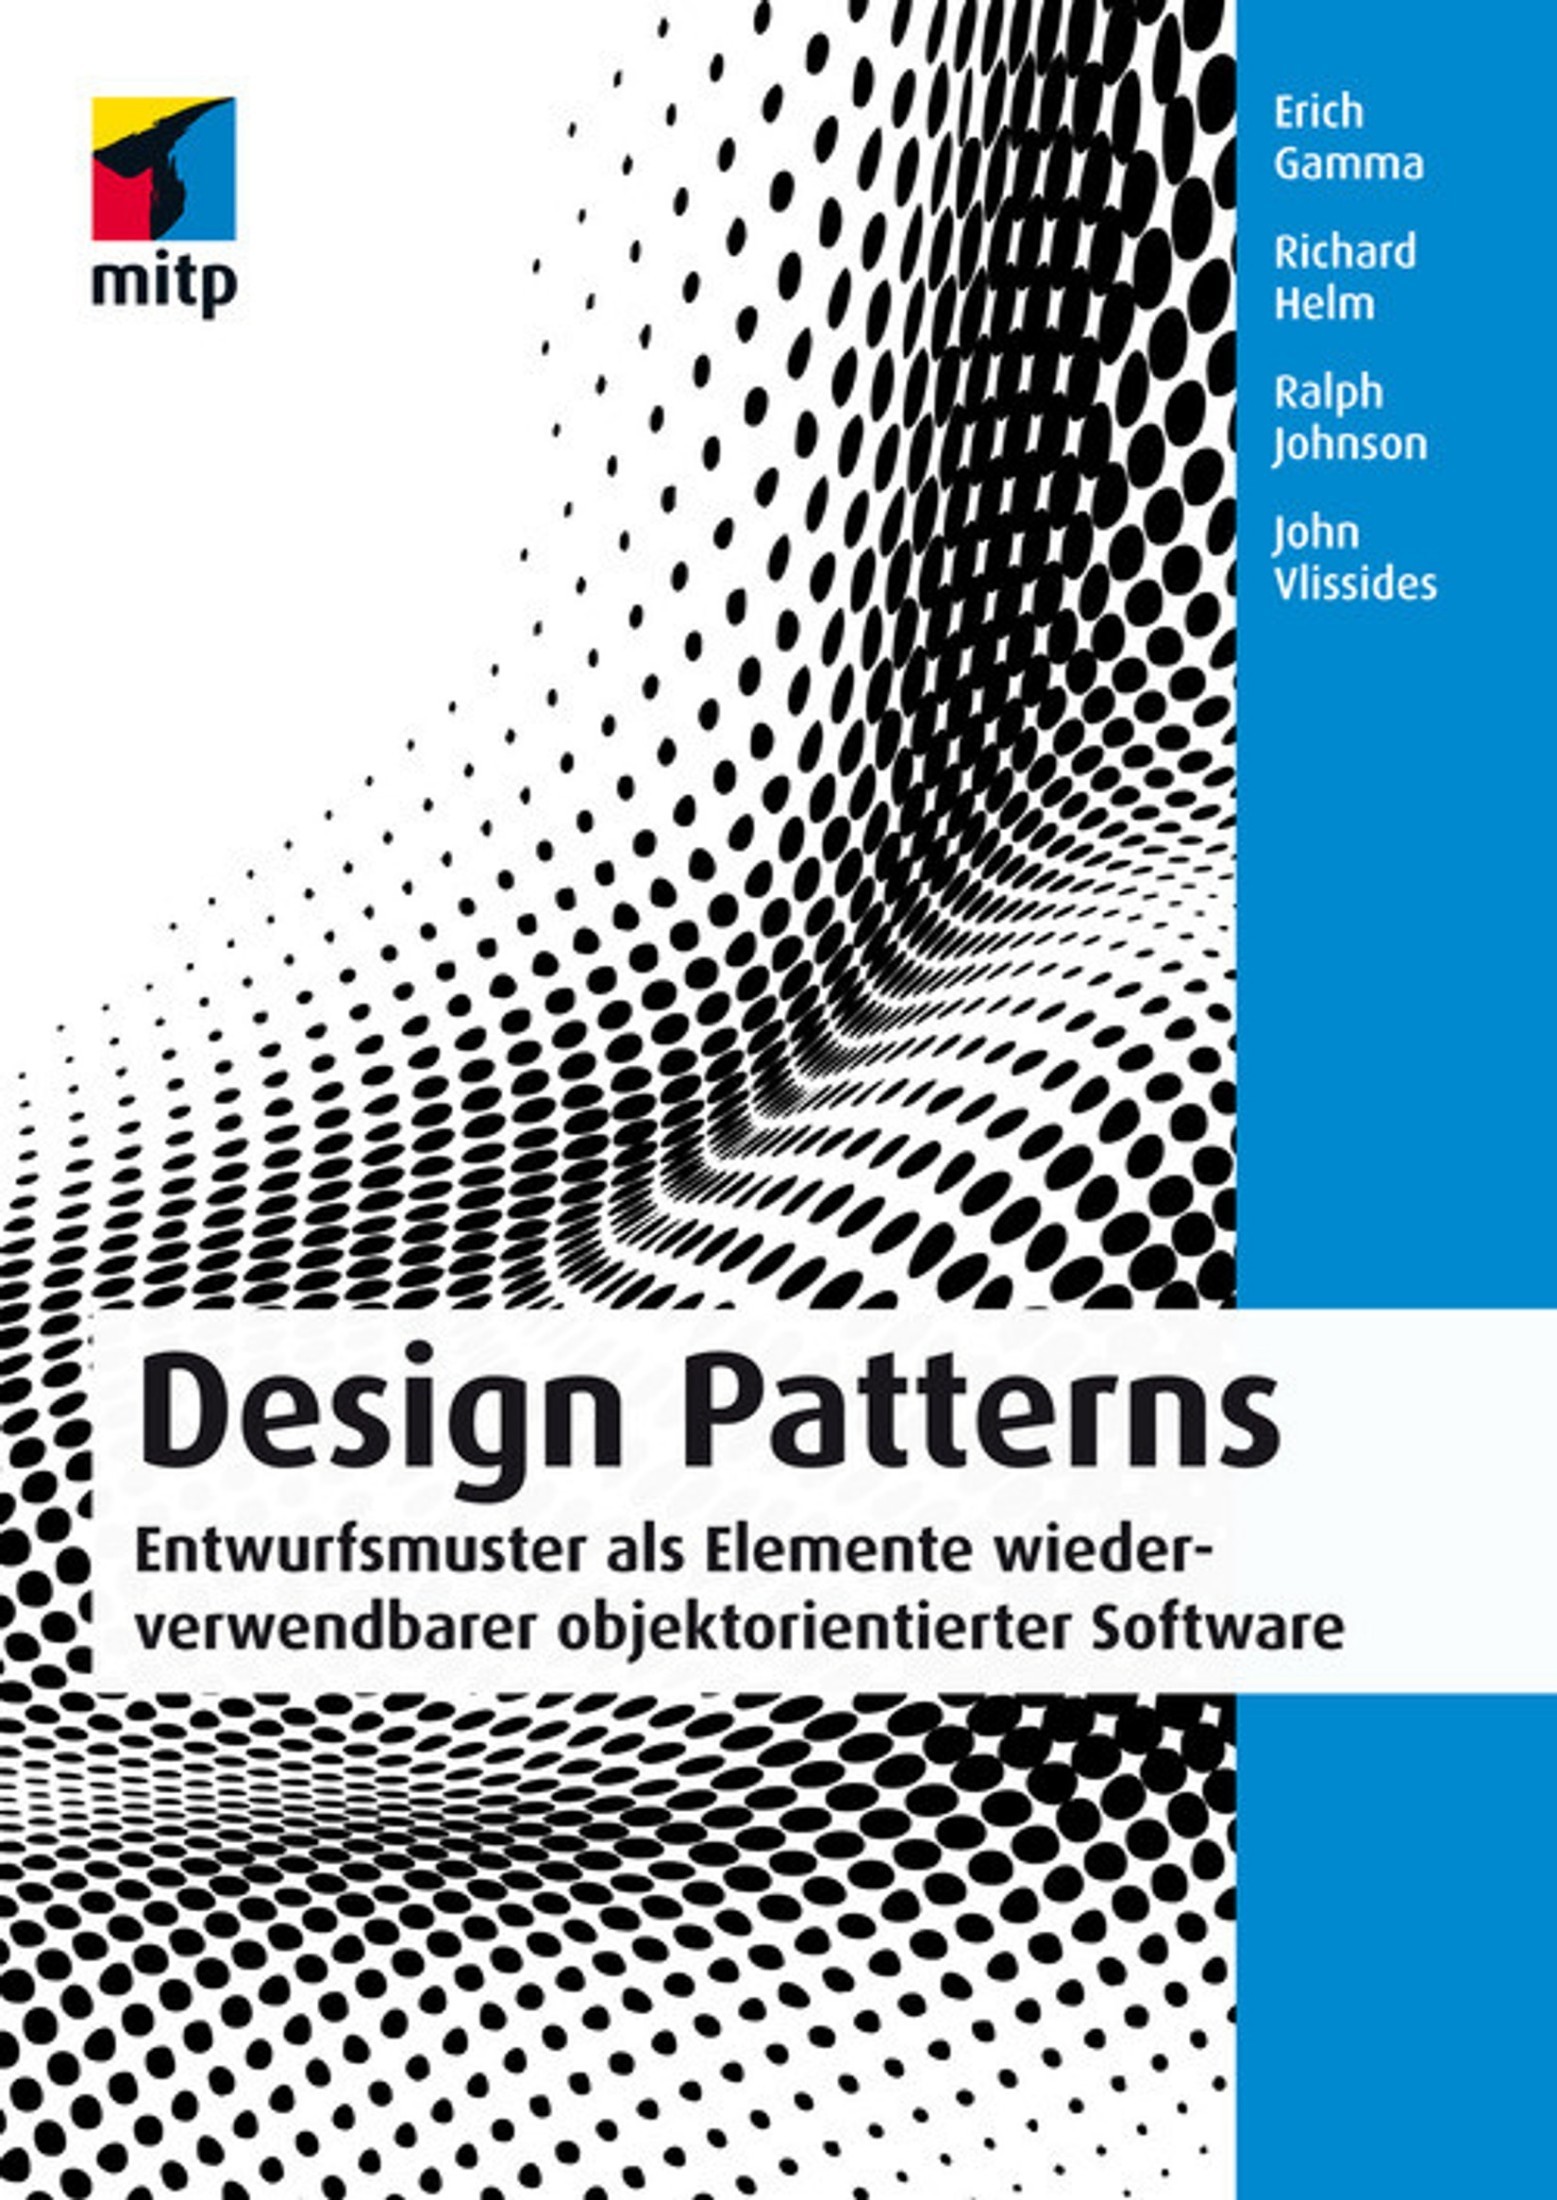 Design Patterns CD: Elements of Reusable Object-Oriented Software